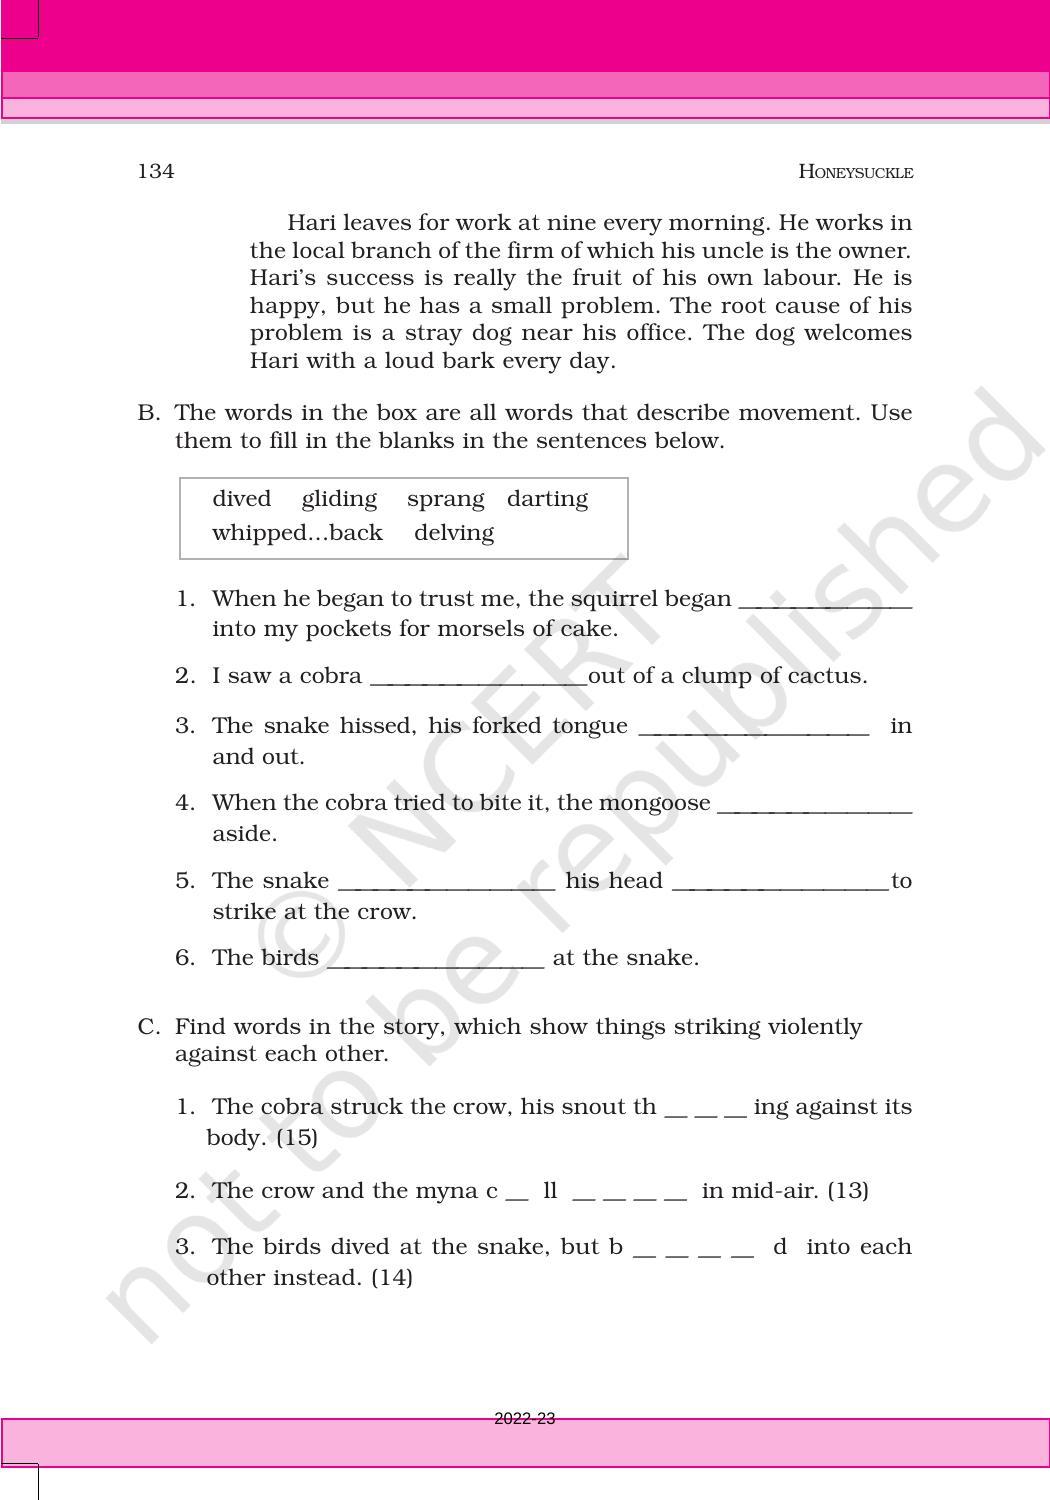 NCERT Book for Class 6 English(Honeysuckle) : Chapter 10-The Banyan Tree - Page 11